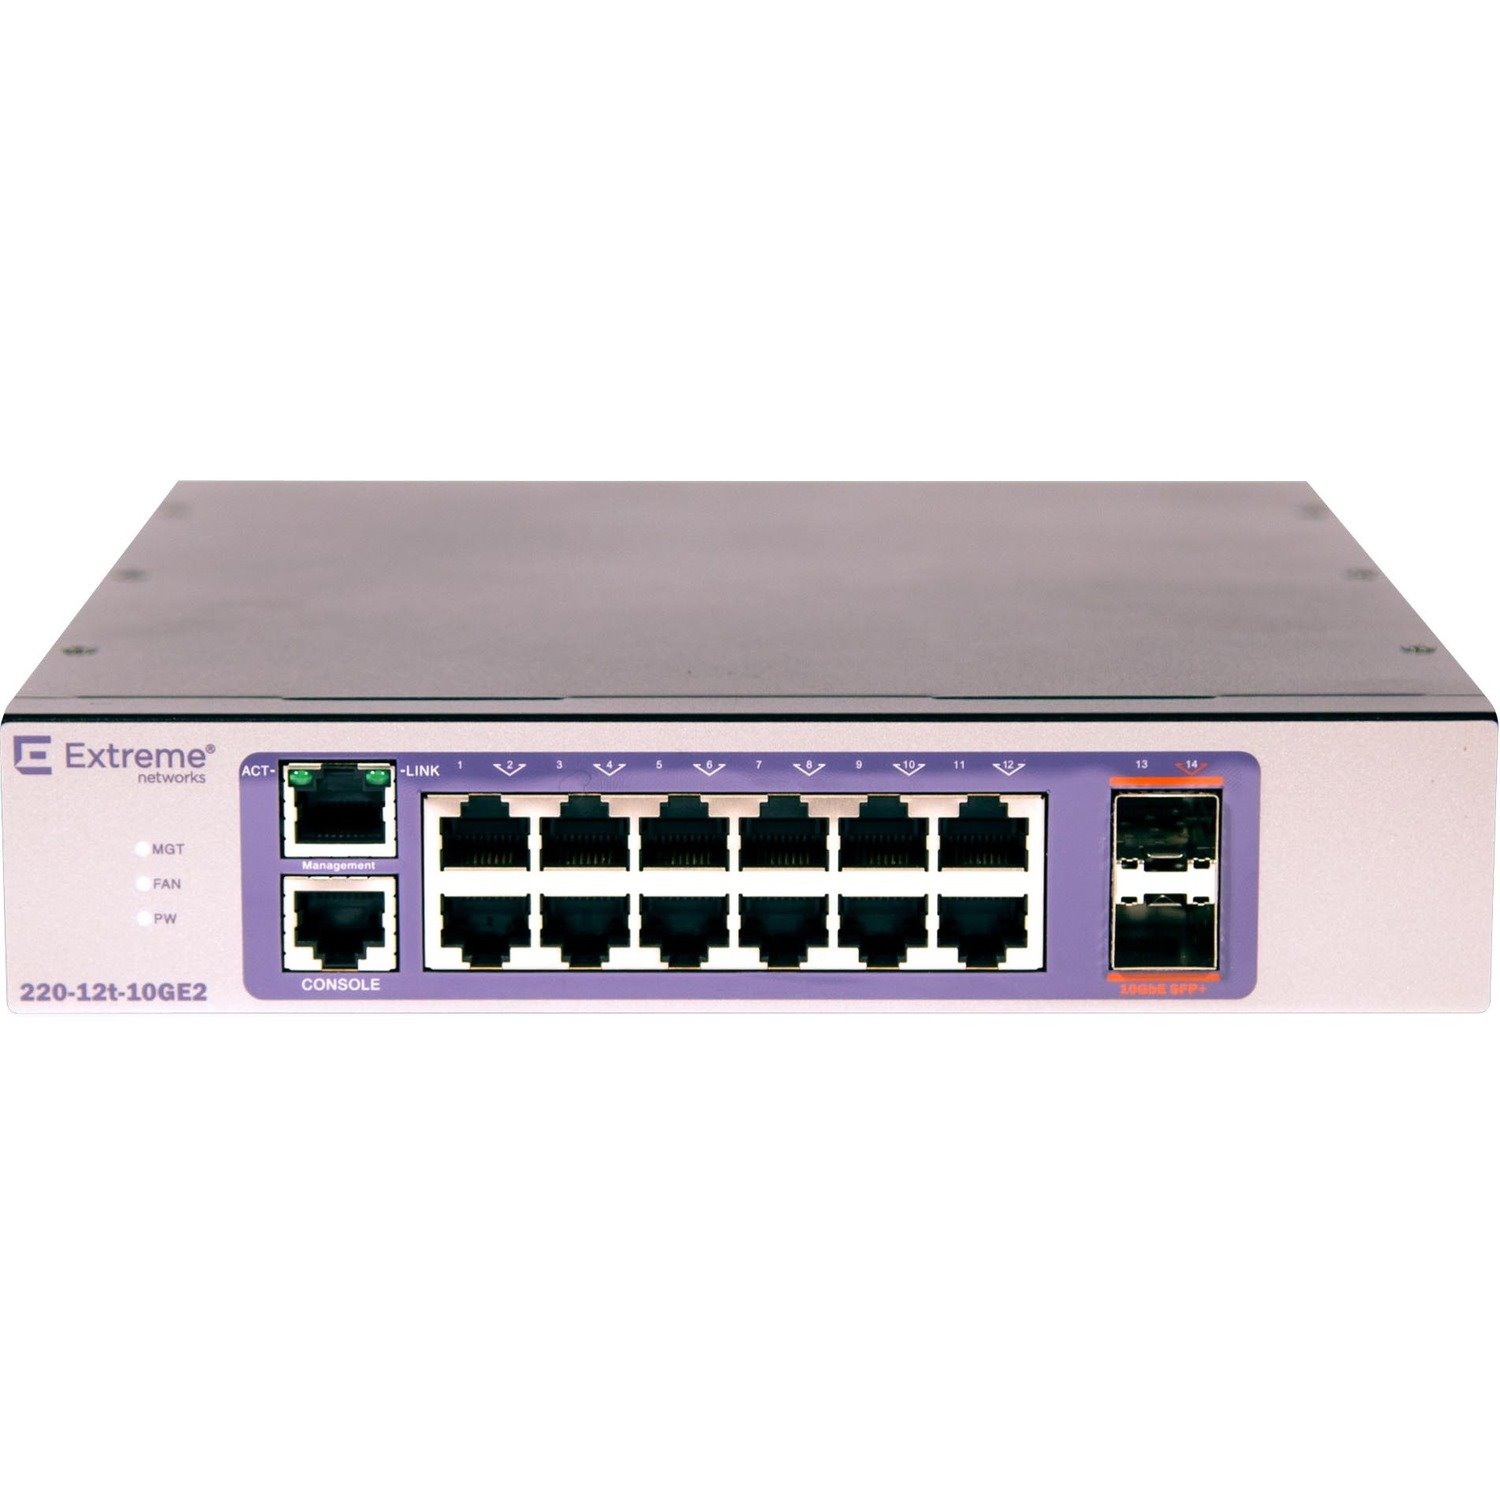 Extreme Networks 220-12t-10GE2 Layer 3 Switch